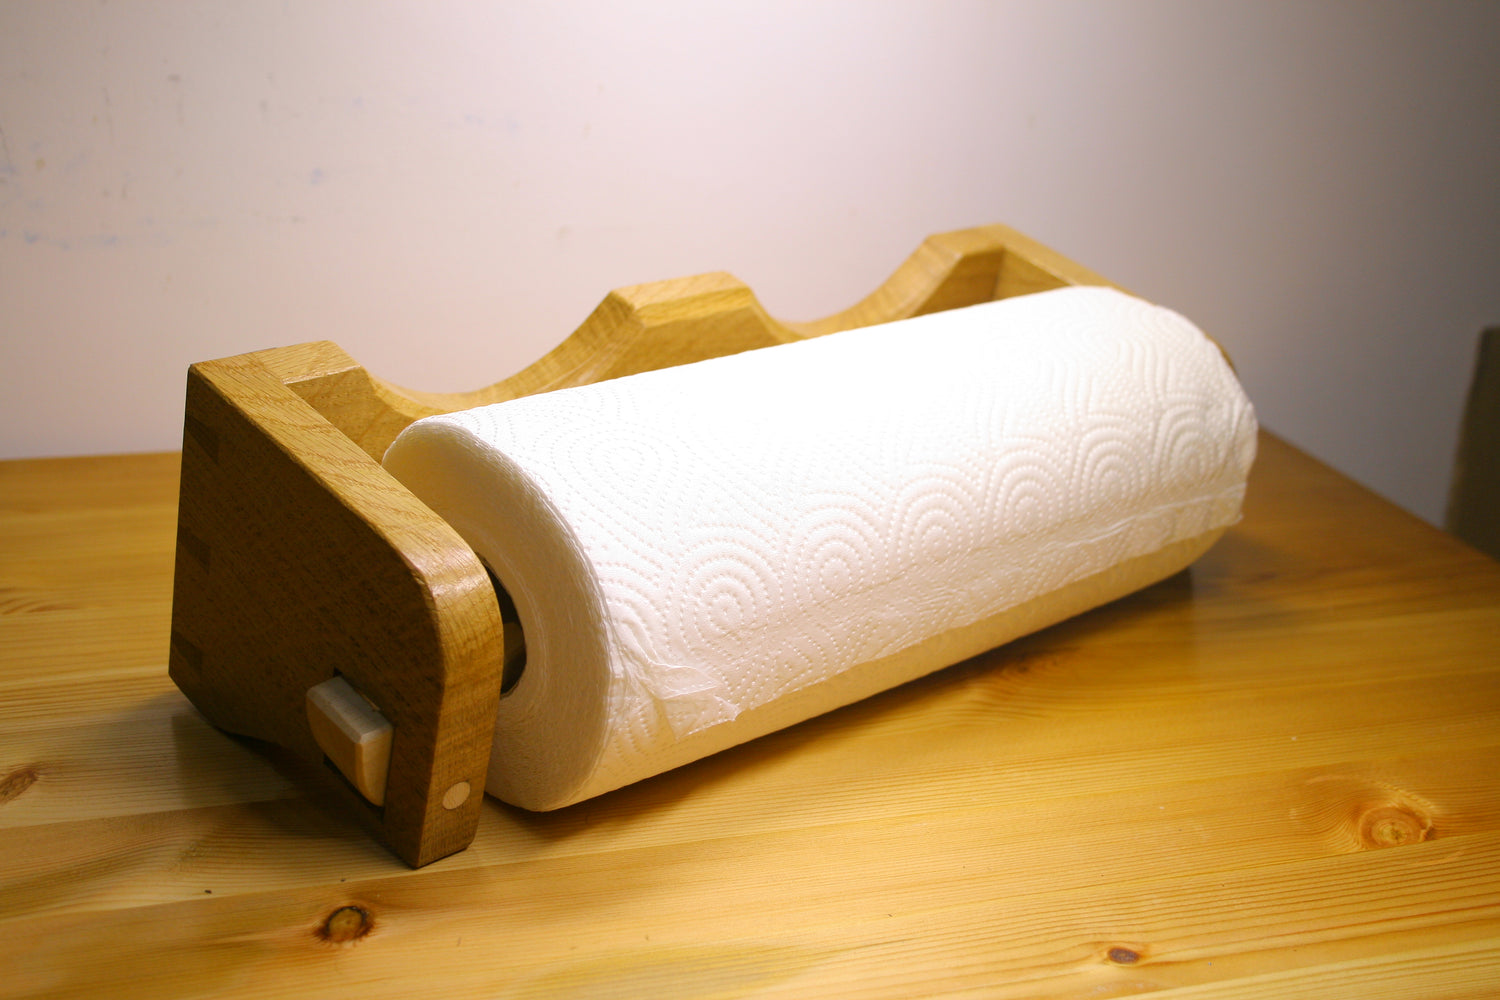 Japanese-style Solid Wood Paper Roll Holder Creative Kitchen